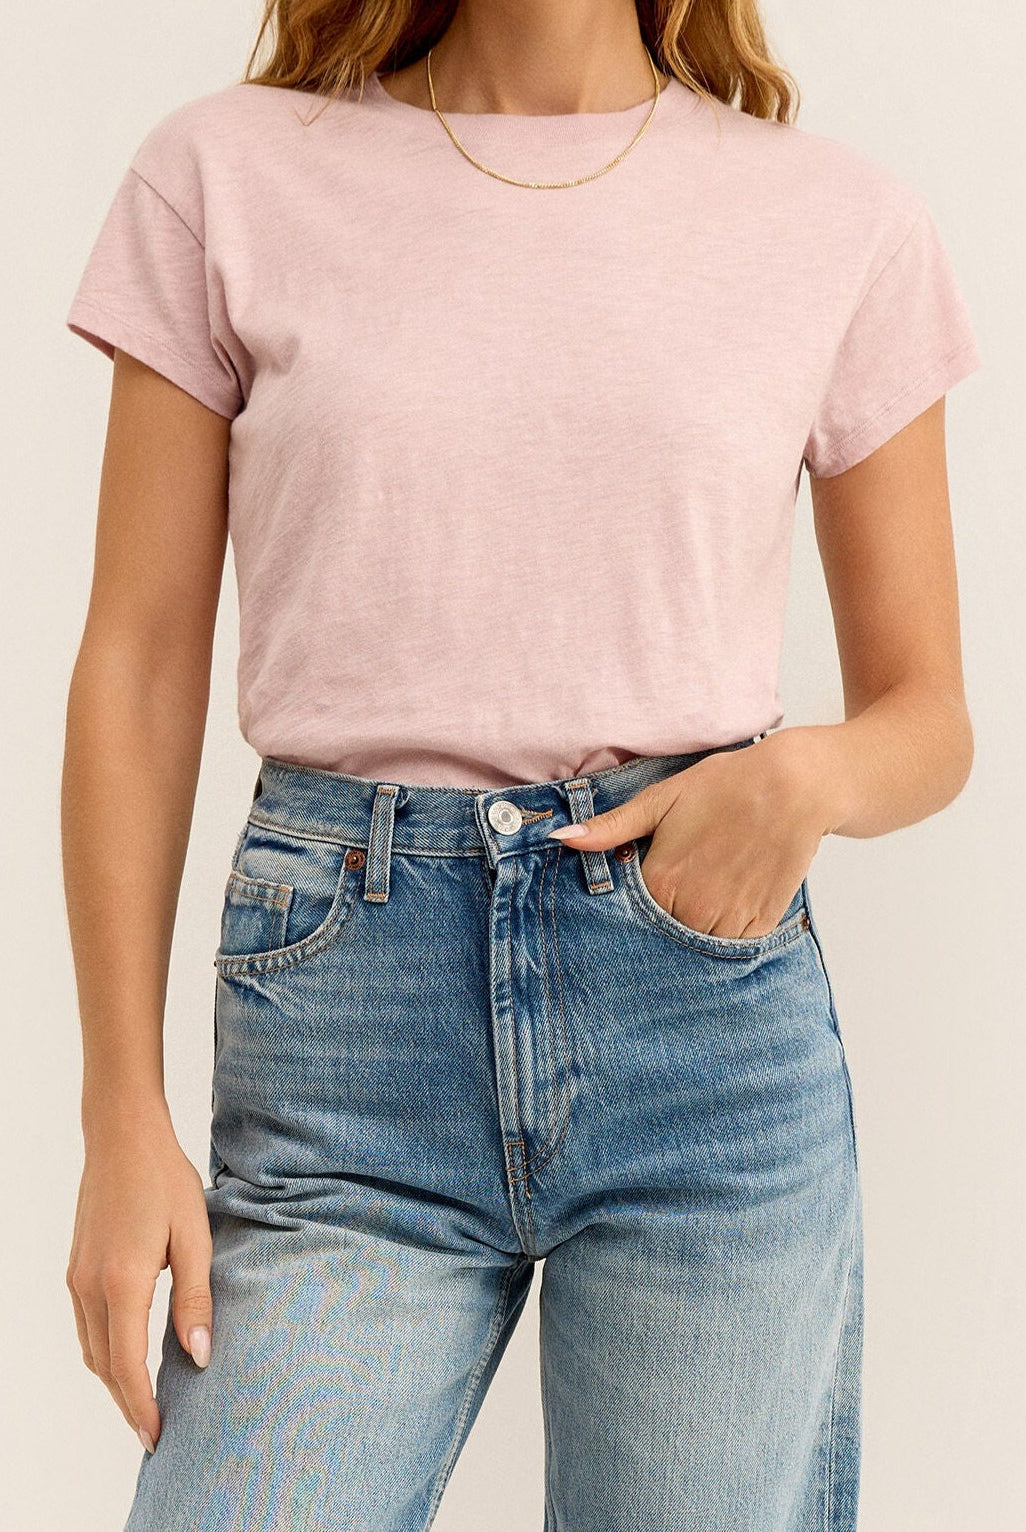 Everyday Purple Tee Apex Ethical Boutique